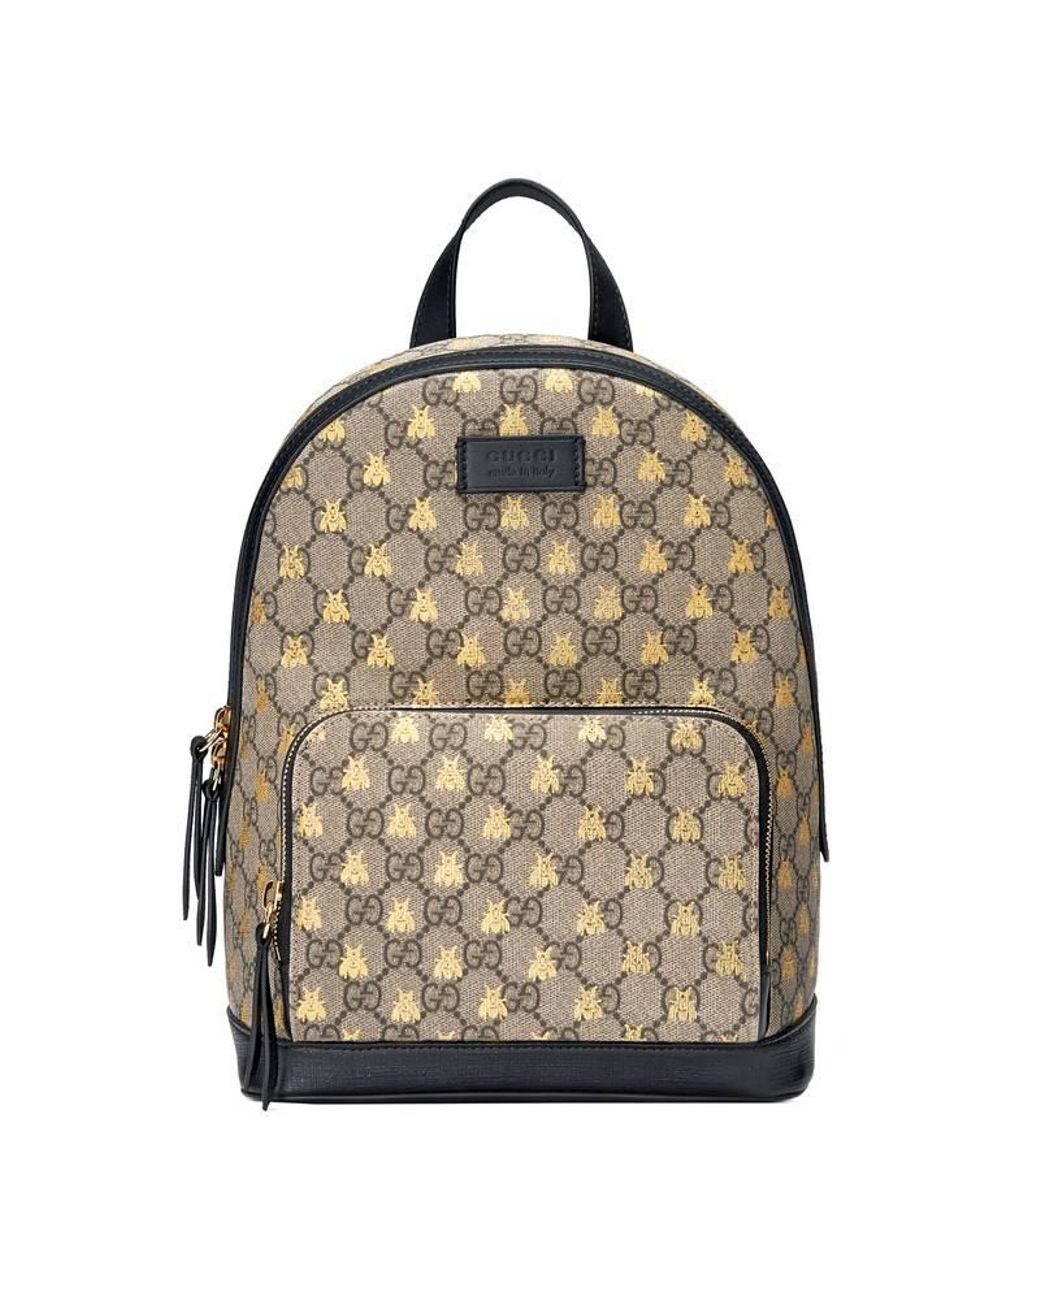 Gucci Pre-Owned 2000-2015 GG Supreme Bee Backpack - Farfetch